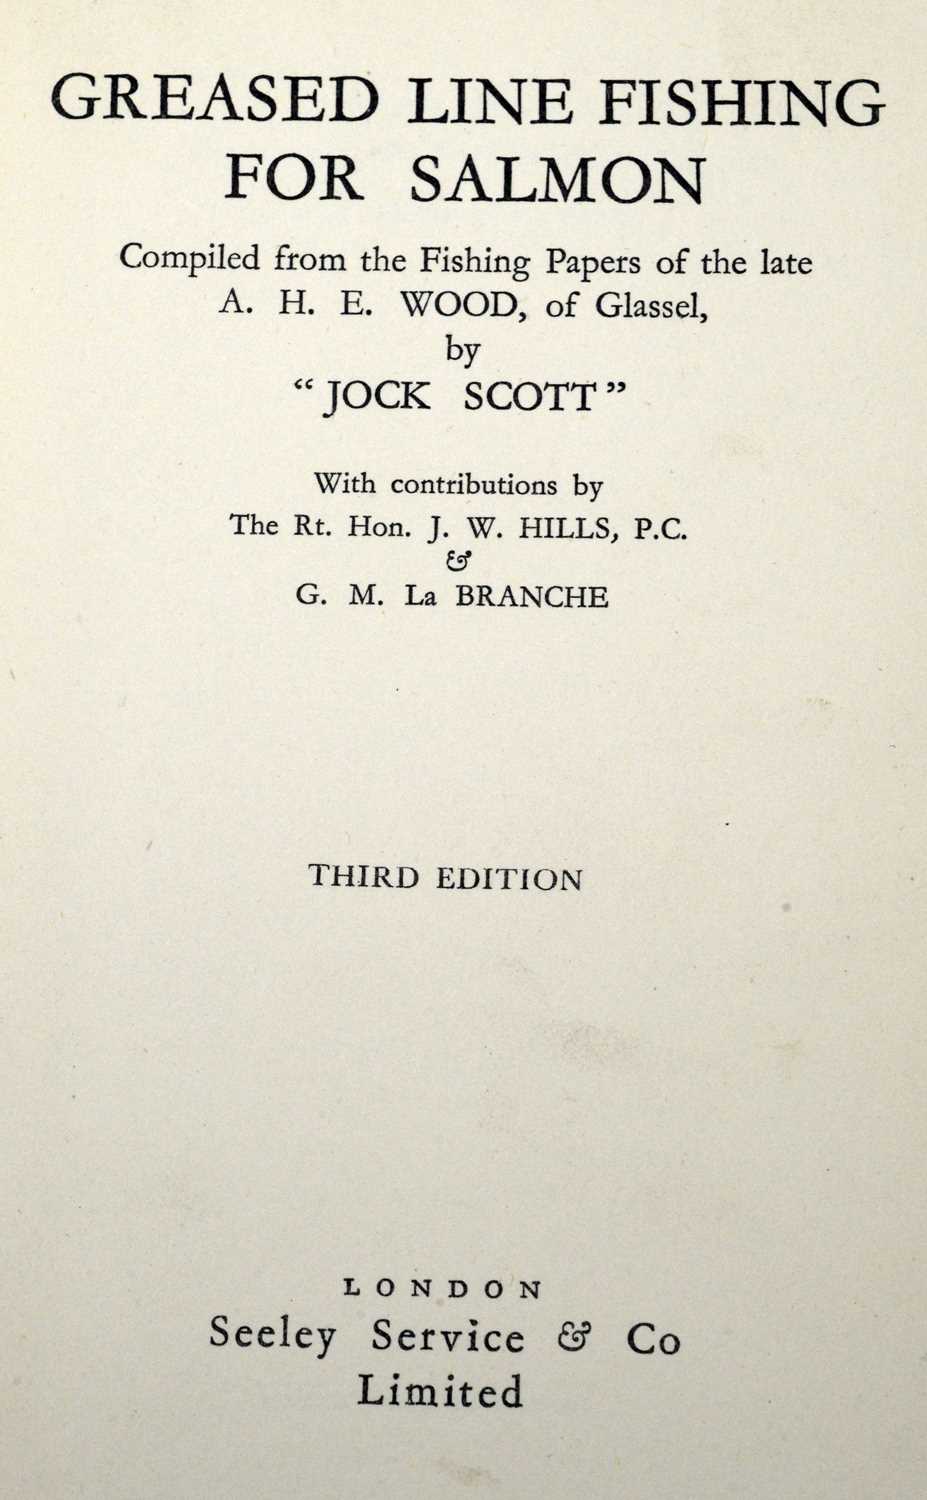 Balfour-Kinnear (G.P.R.) Catching Salmon and Sea-trout, and books on angling - Image 5 of 5